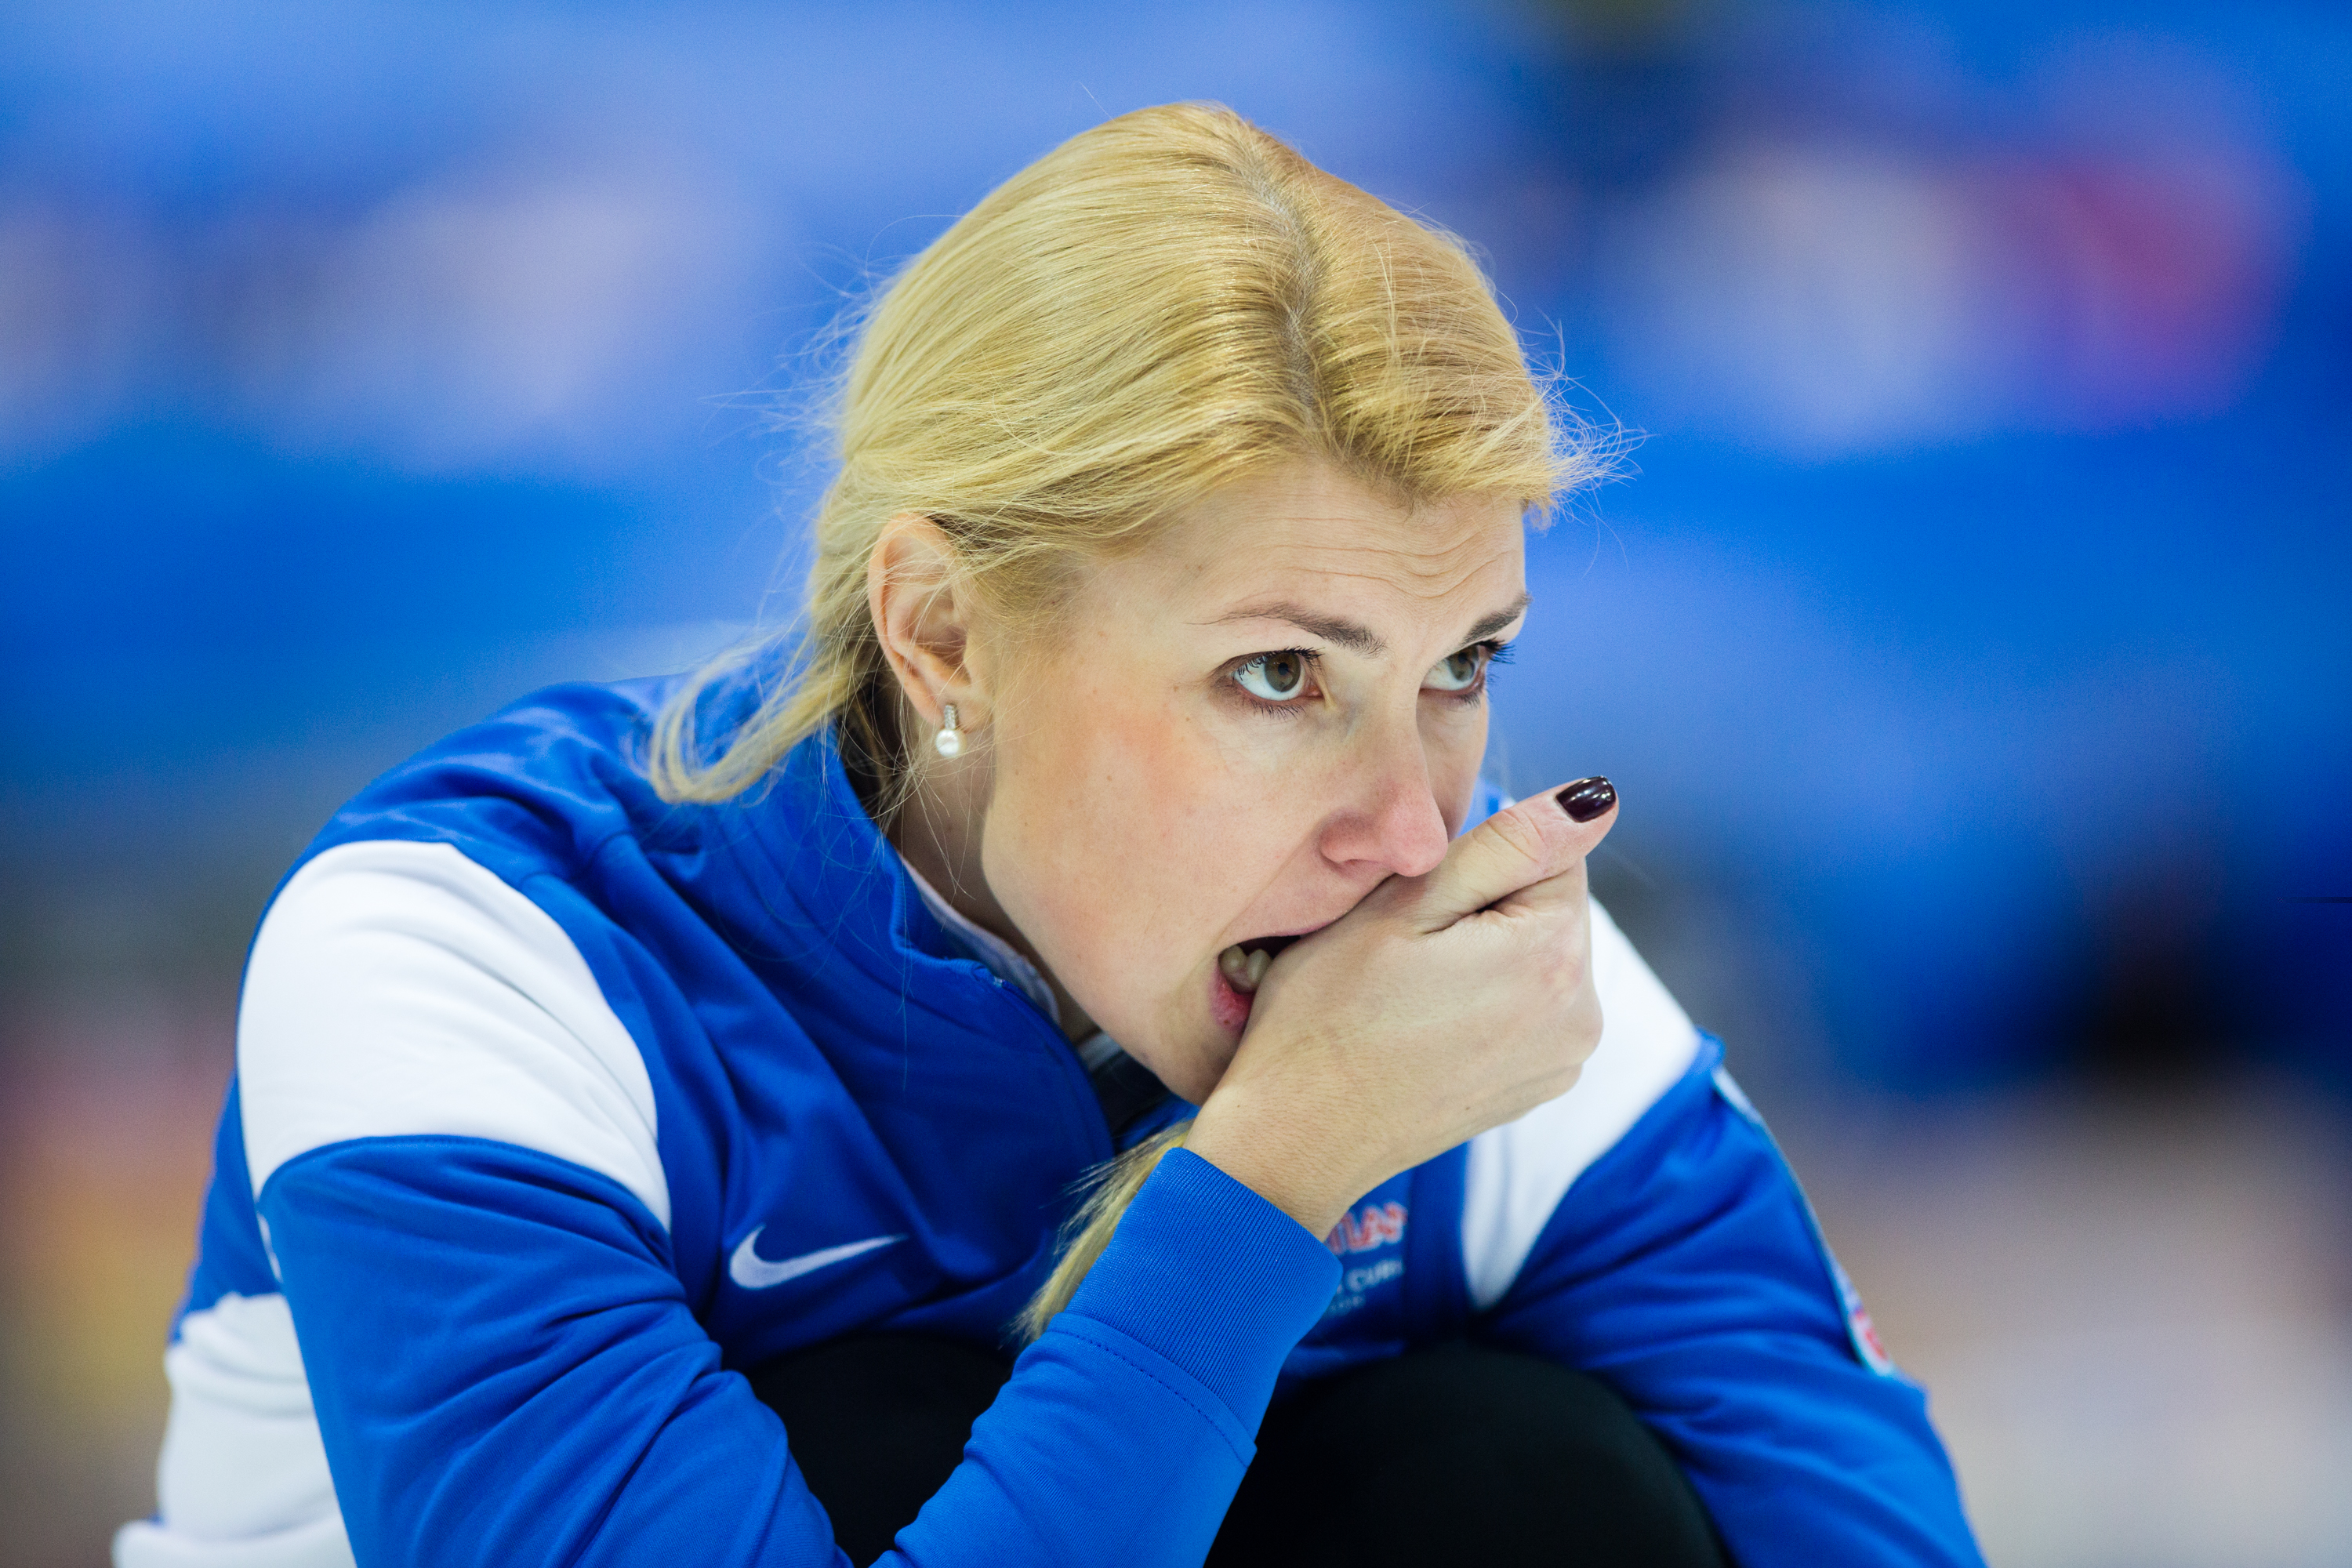 Maile Moelder, the Estonian Skip, watches a stone she threw travel down the ice at the Le Gruyère European Curling Championships on 11/25/2014. Estonia ended up in 8th place with a record of 2 and 7.